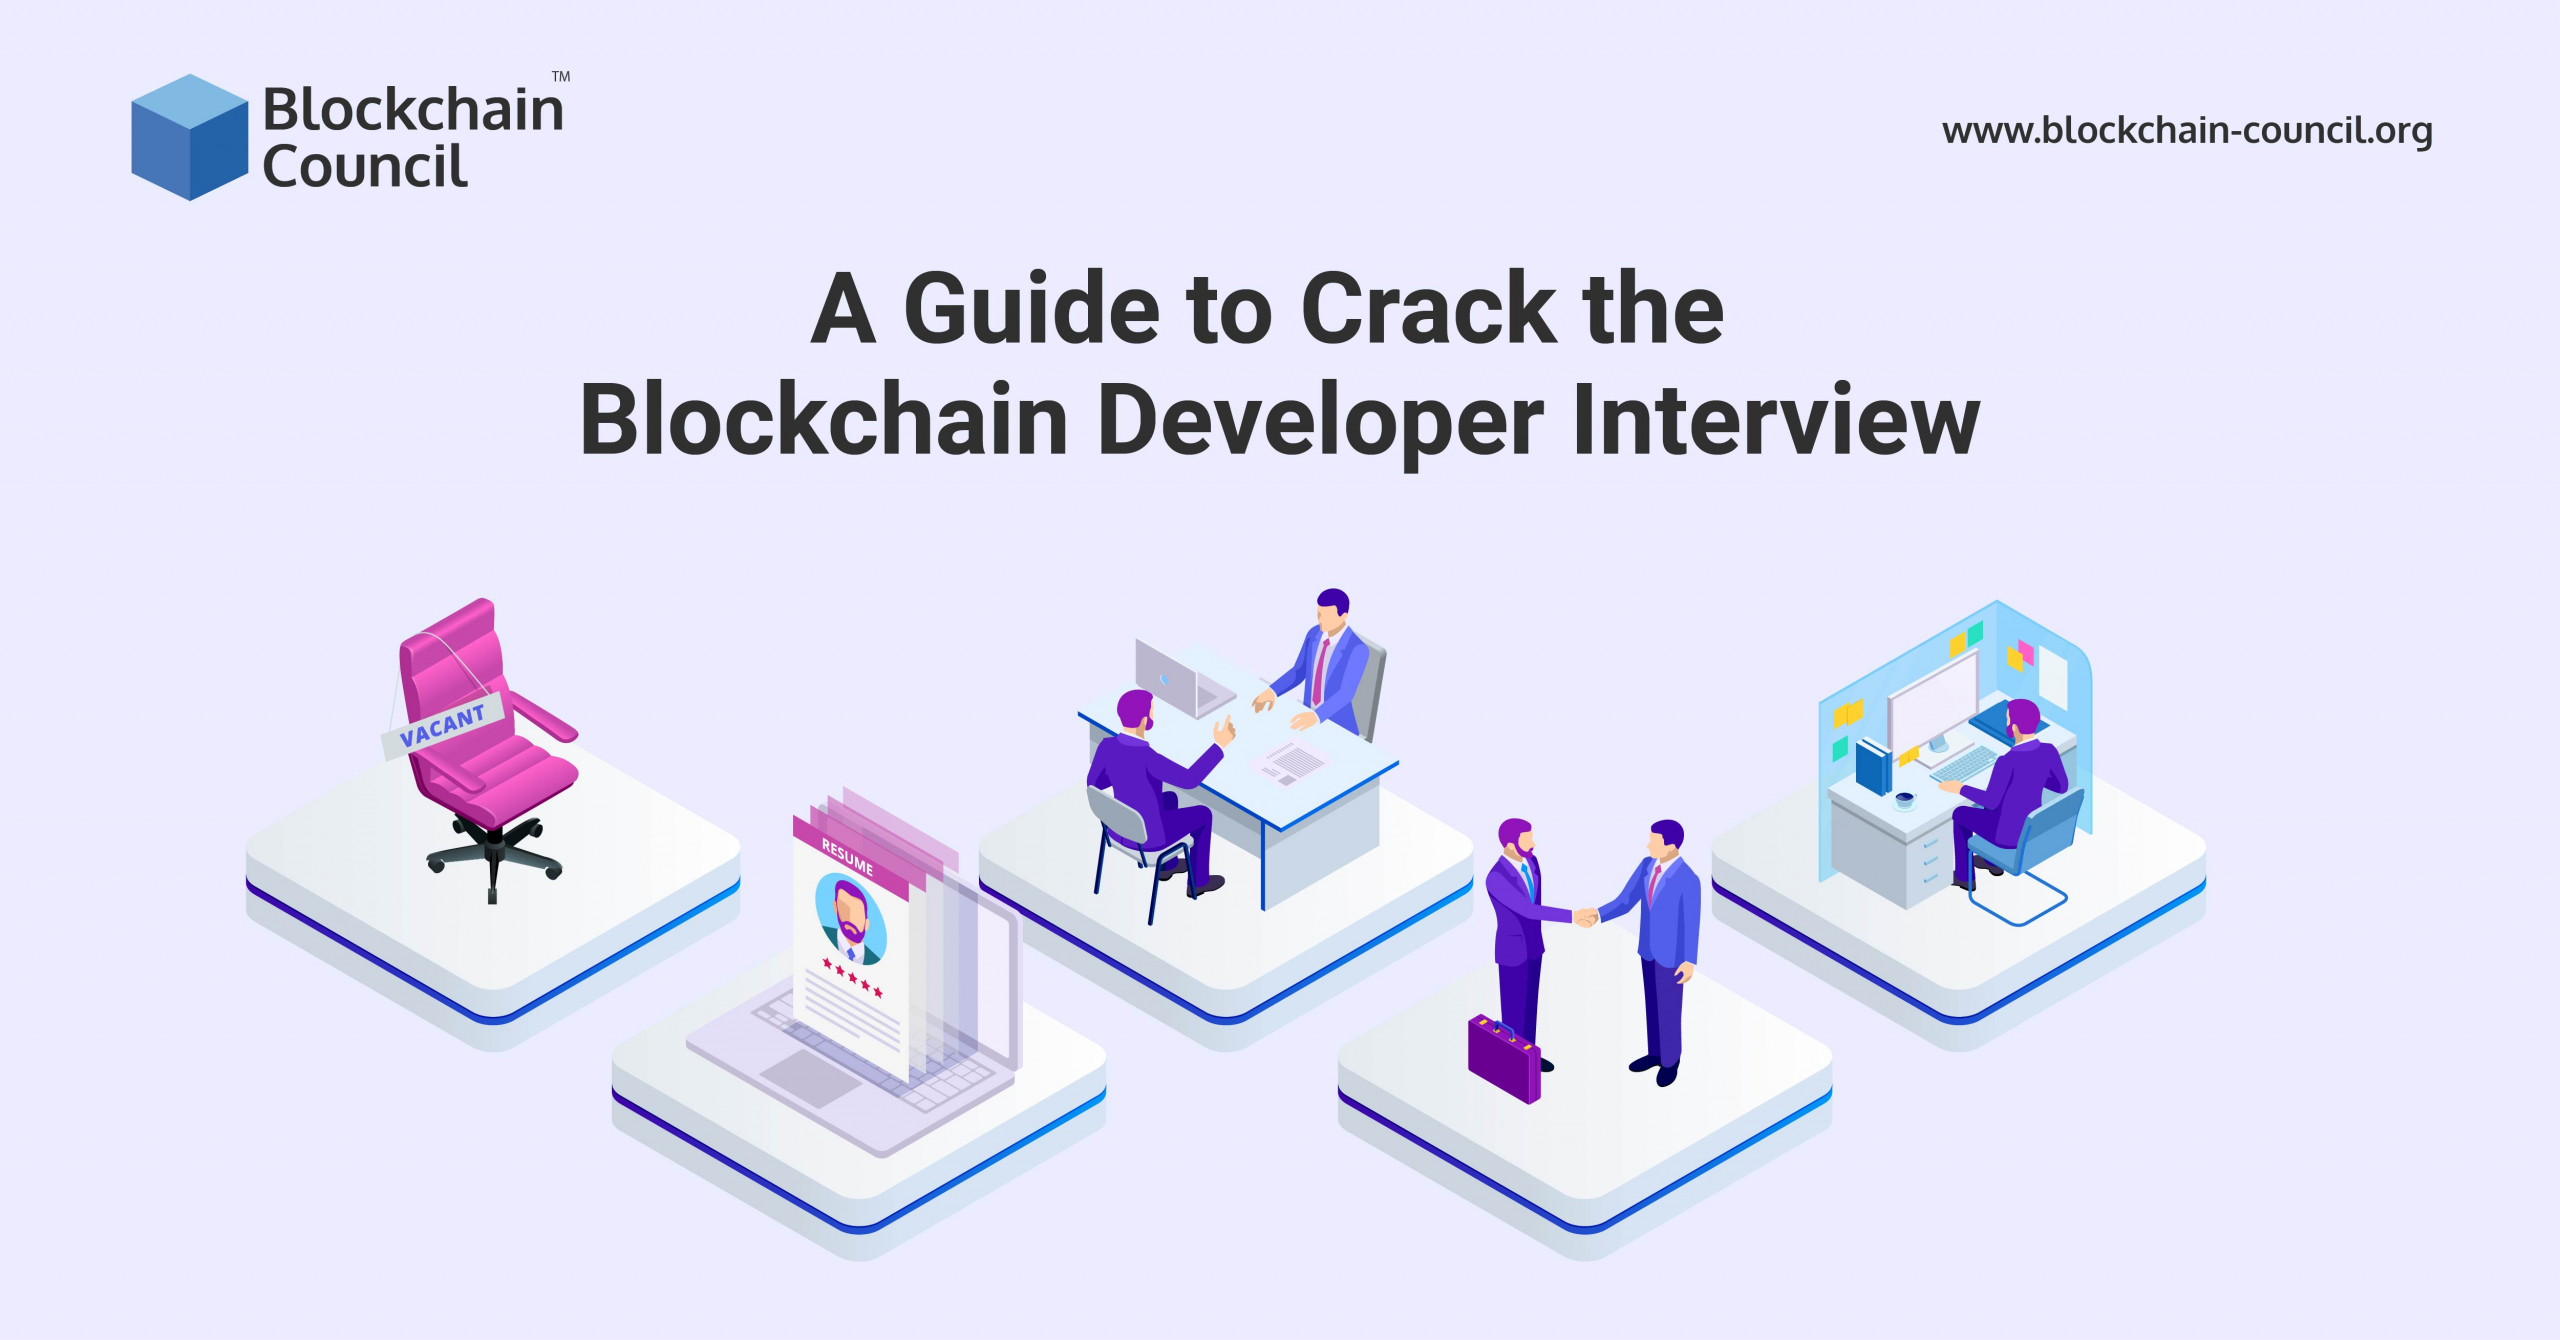 A Guide to Crack the Blockchain Developer Interview